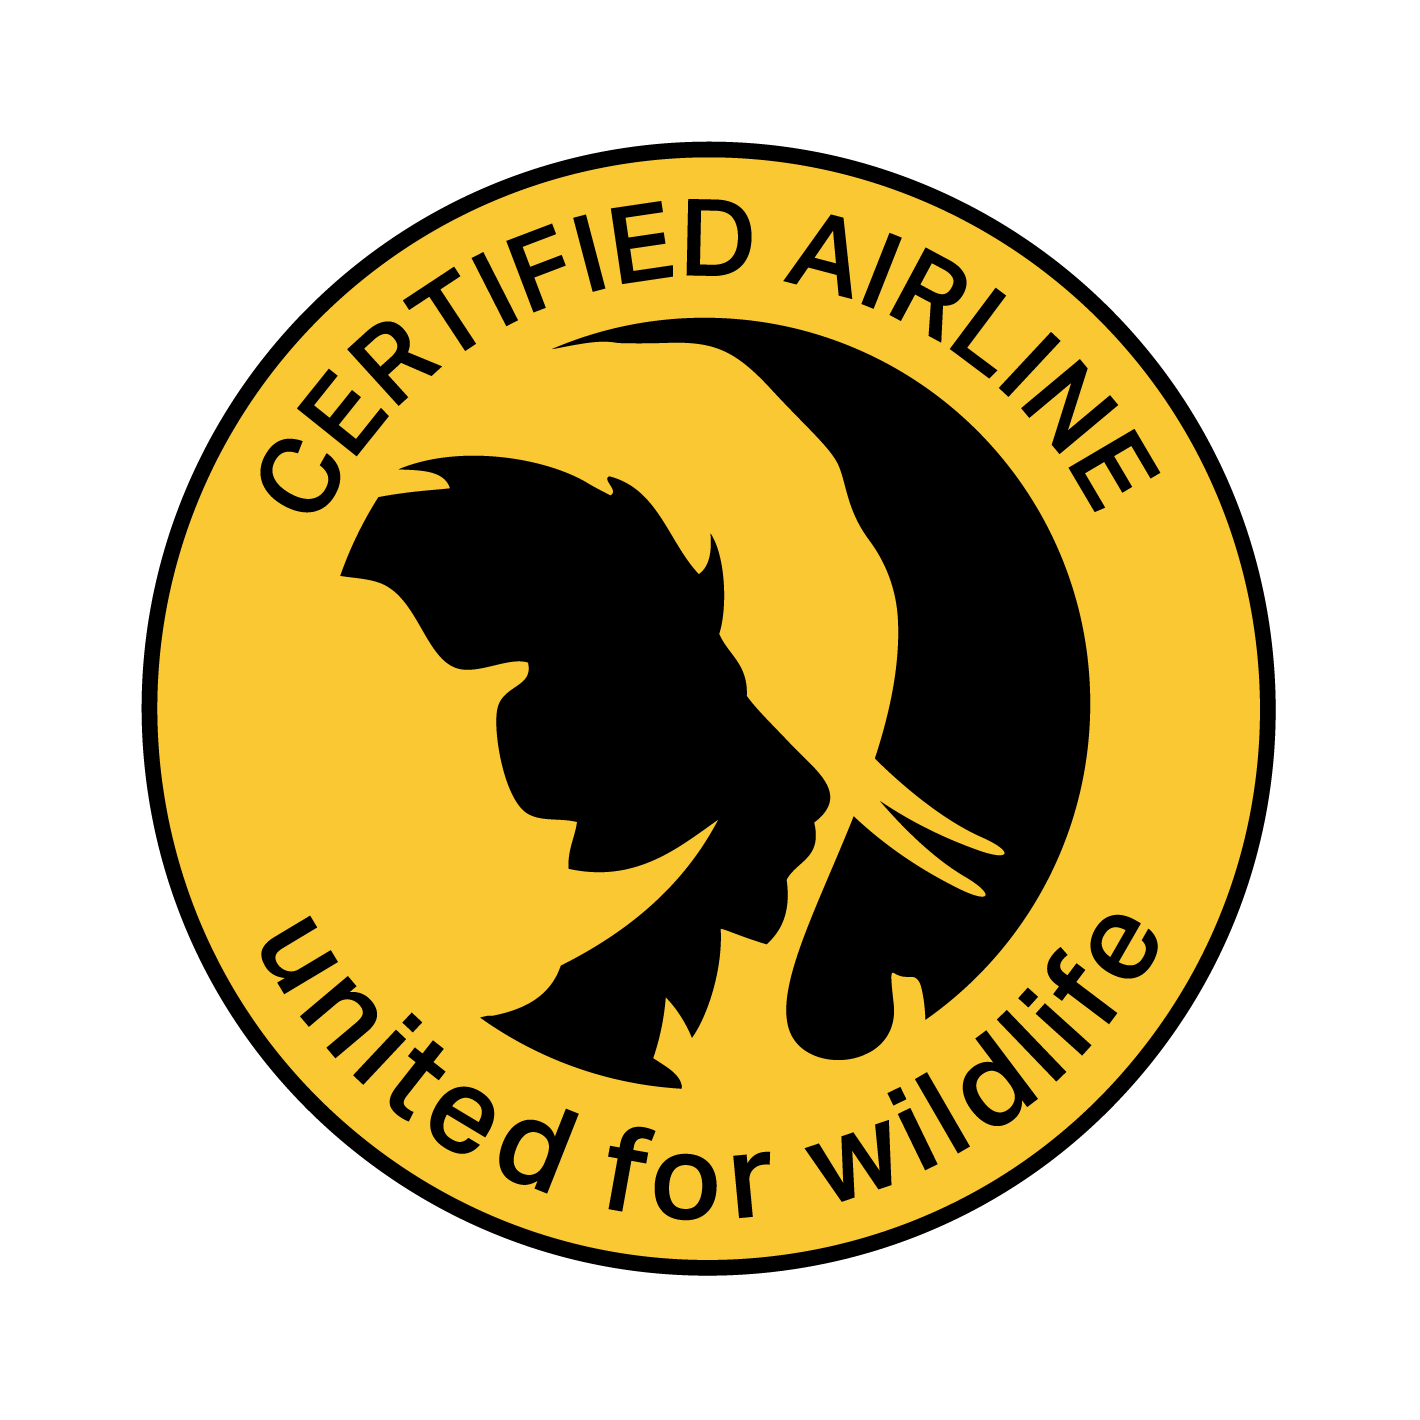 Certified Airline united for wildlife